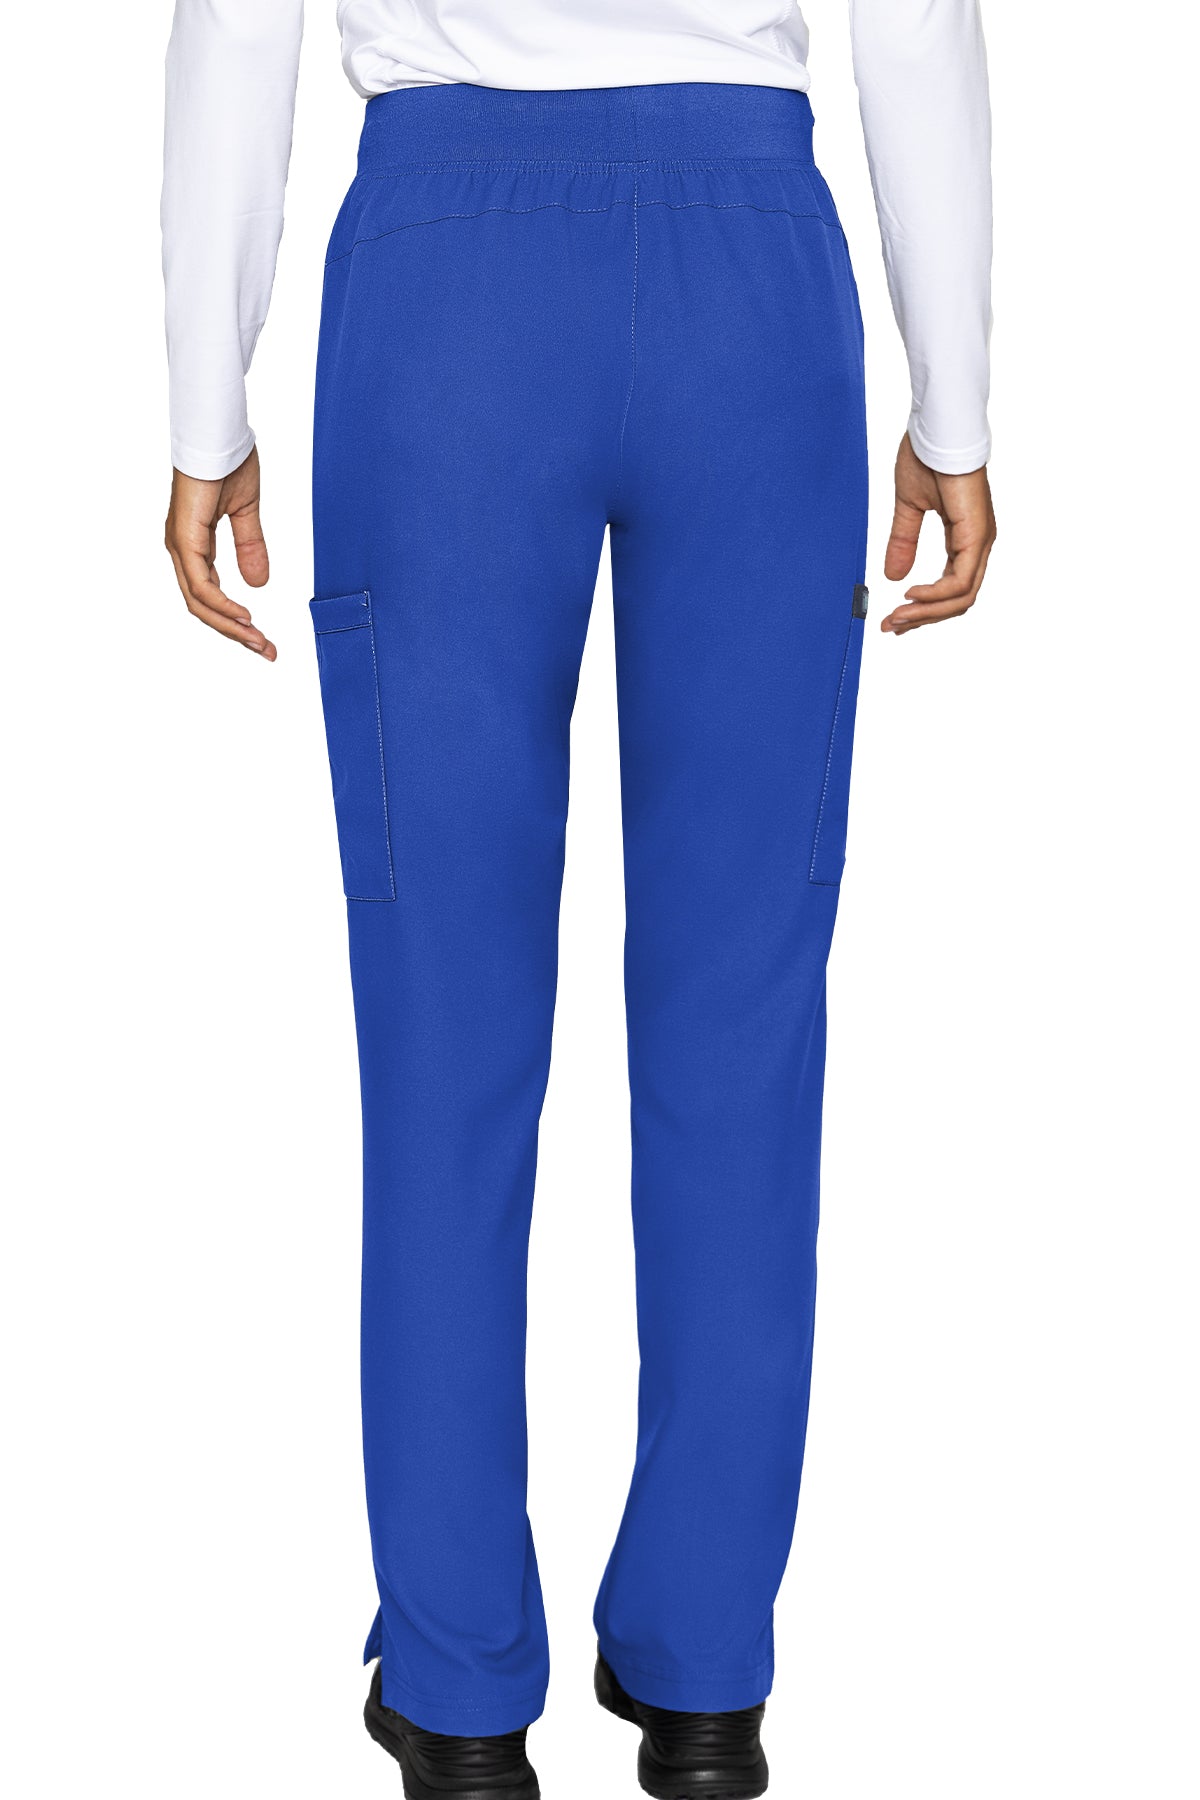 Med Couture 2711 Insight Women's Jogger Pant - PETITE – Valley West Uniforms